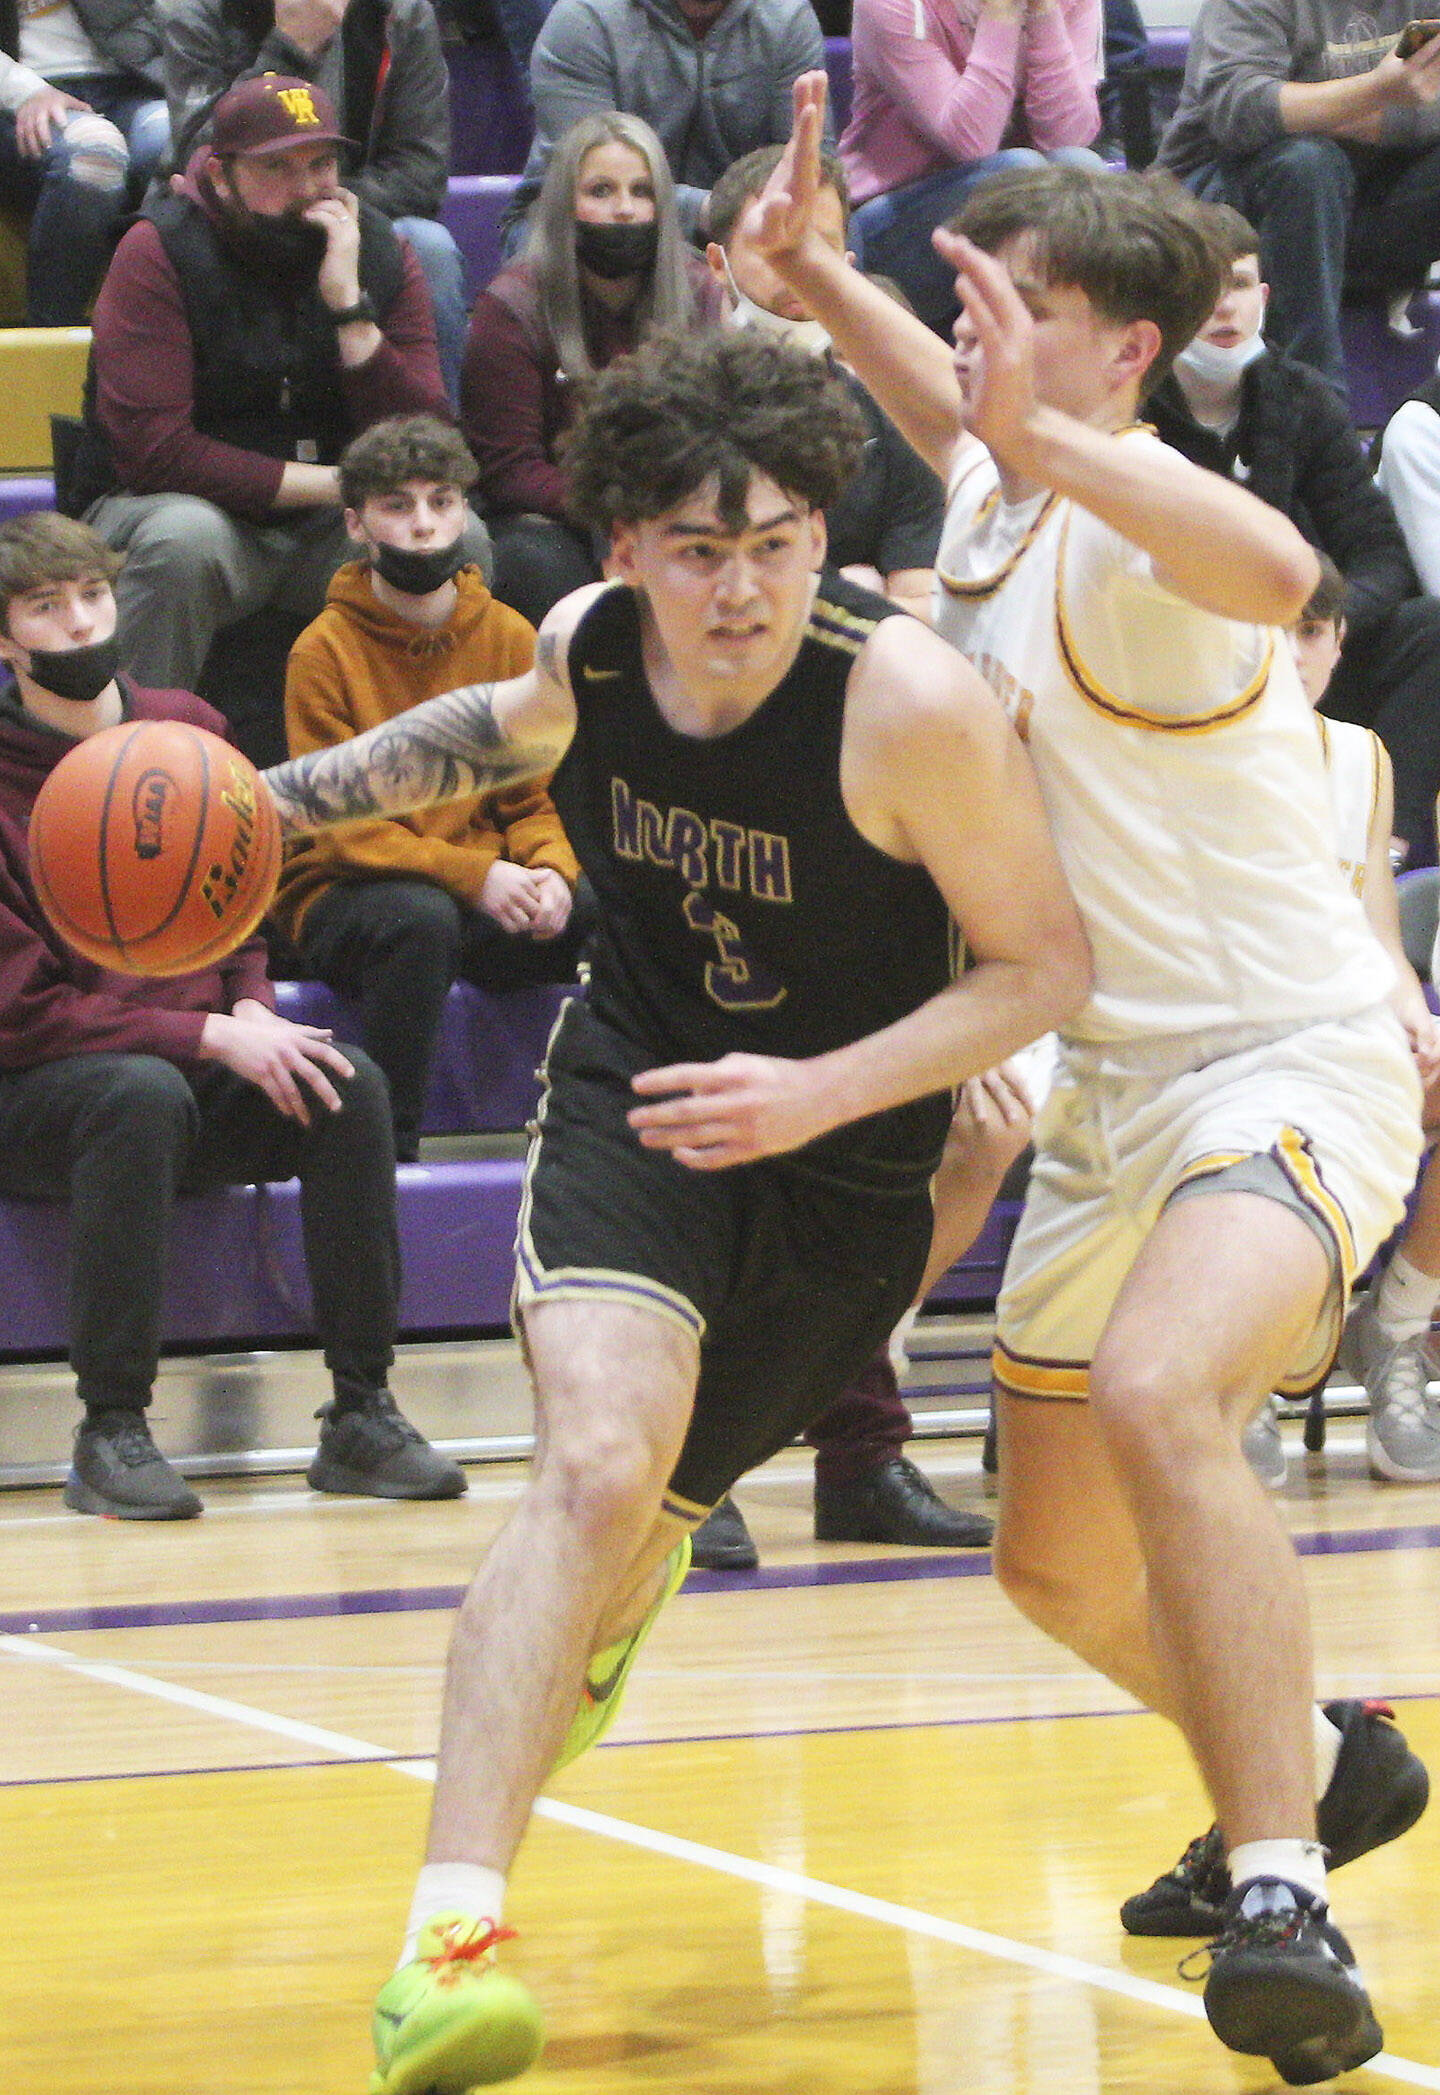 Aiden Olmstead goes baseline against White River in the title game. Steve Powell/North Kitsap Herald photos